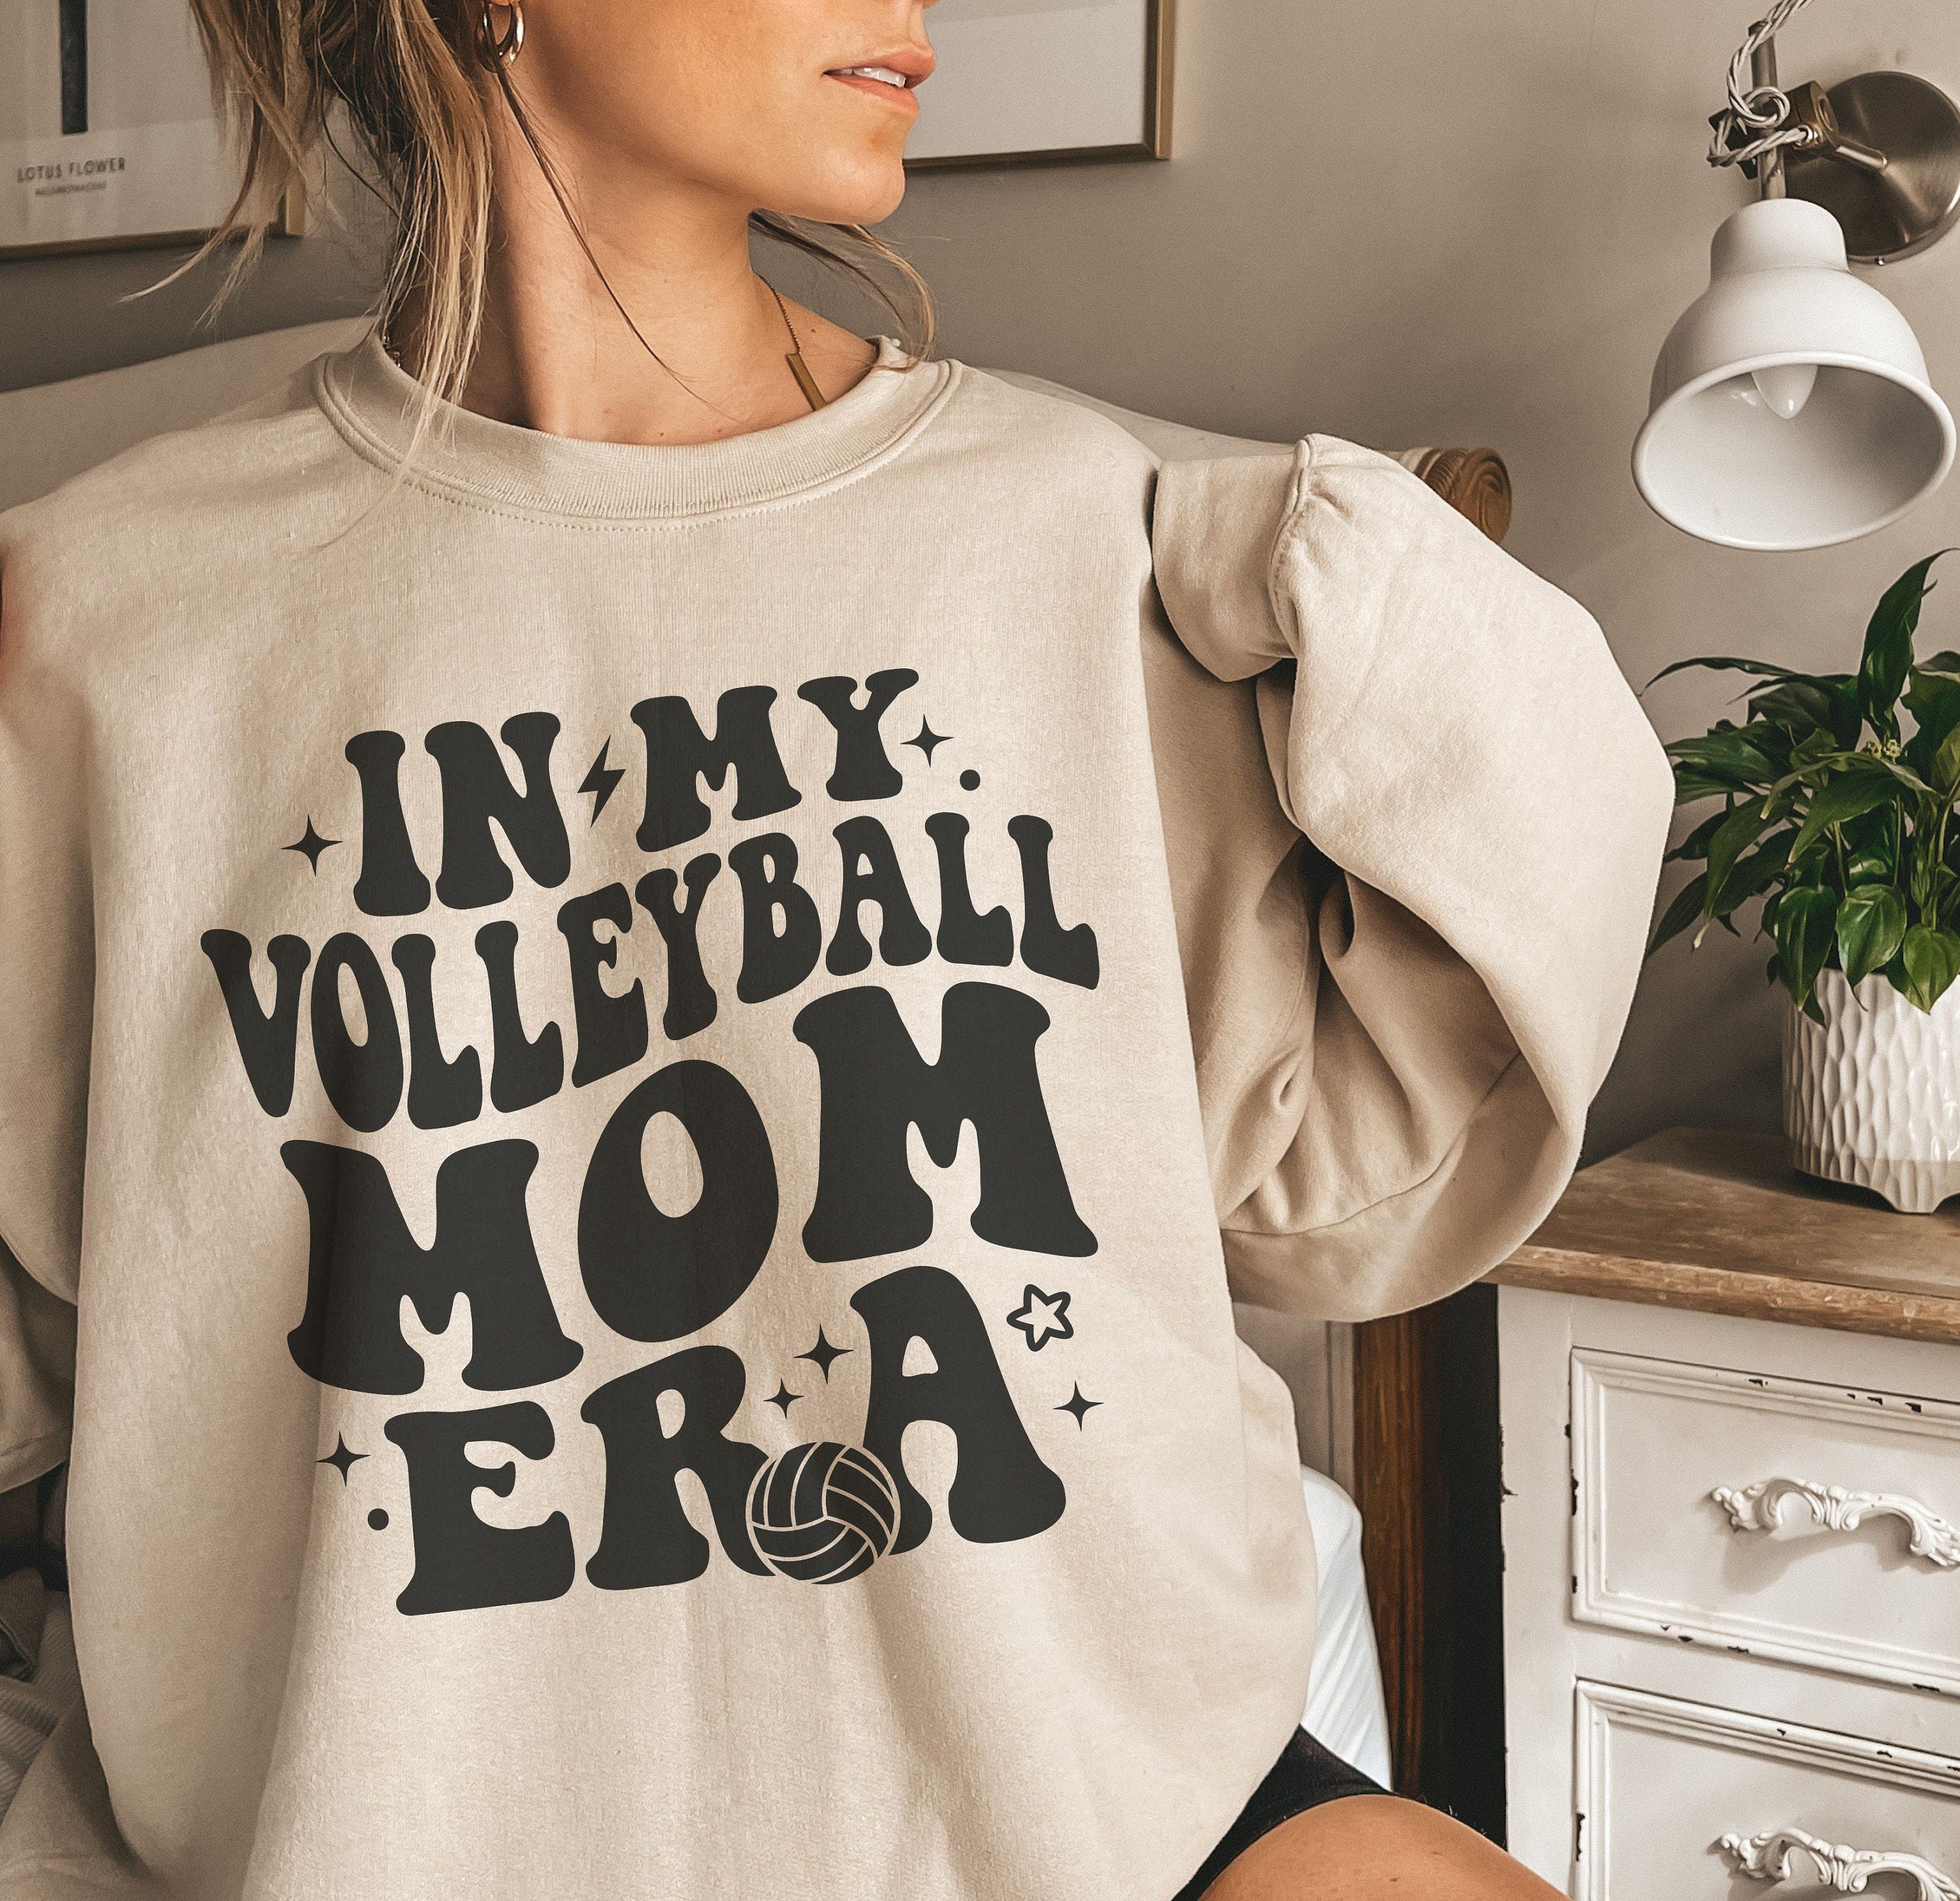 In My Volleyball Mom Era Sweatshirt, Volleyball Mom Sweater, Volleyball Mom Era Shirt, Volleyball Mama Shirt, Game Day Shirt, Gift for Mom